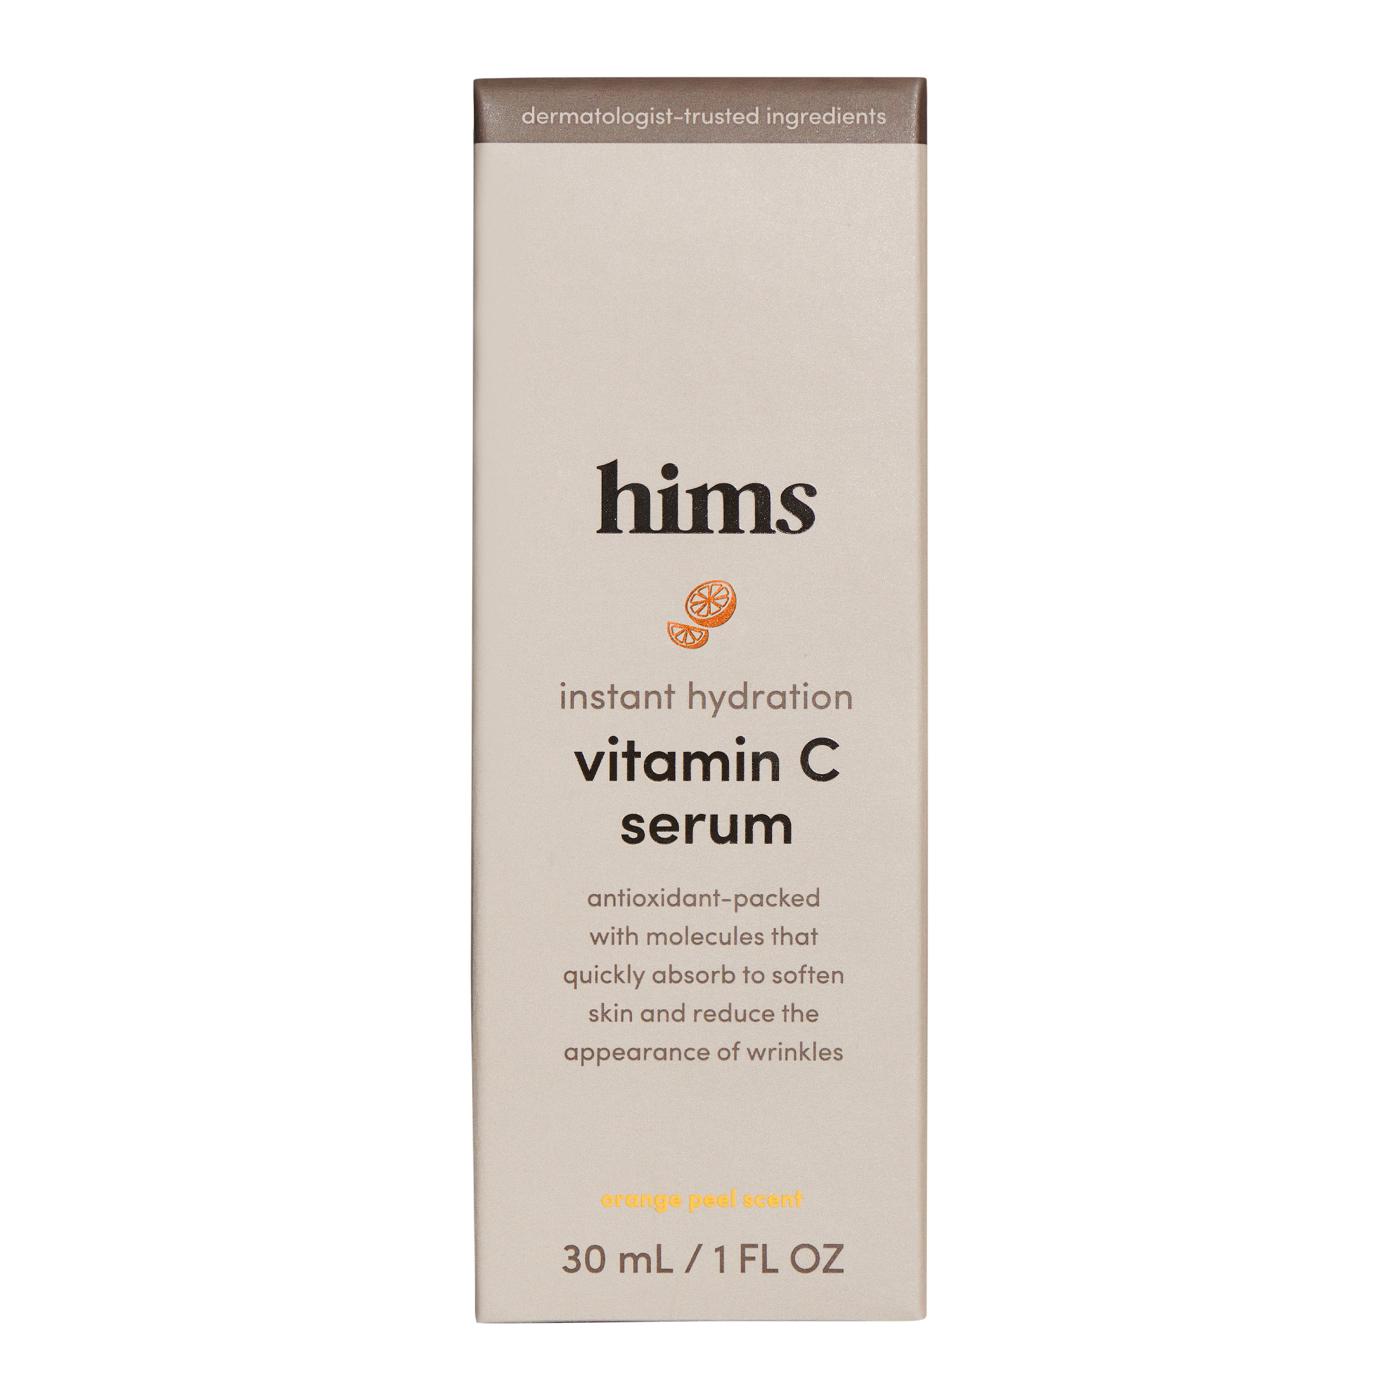 Hims Instant Hydration Vitamin C Serum; image 1 of 2